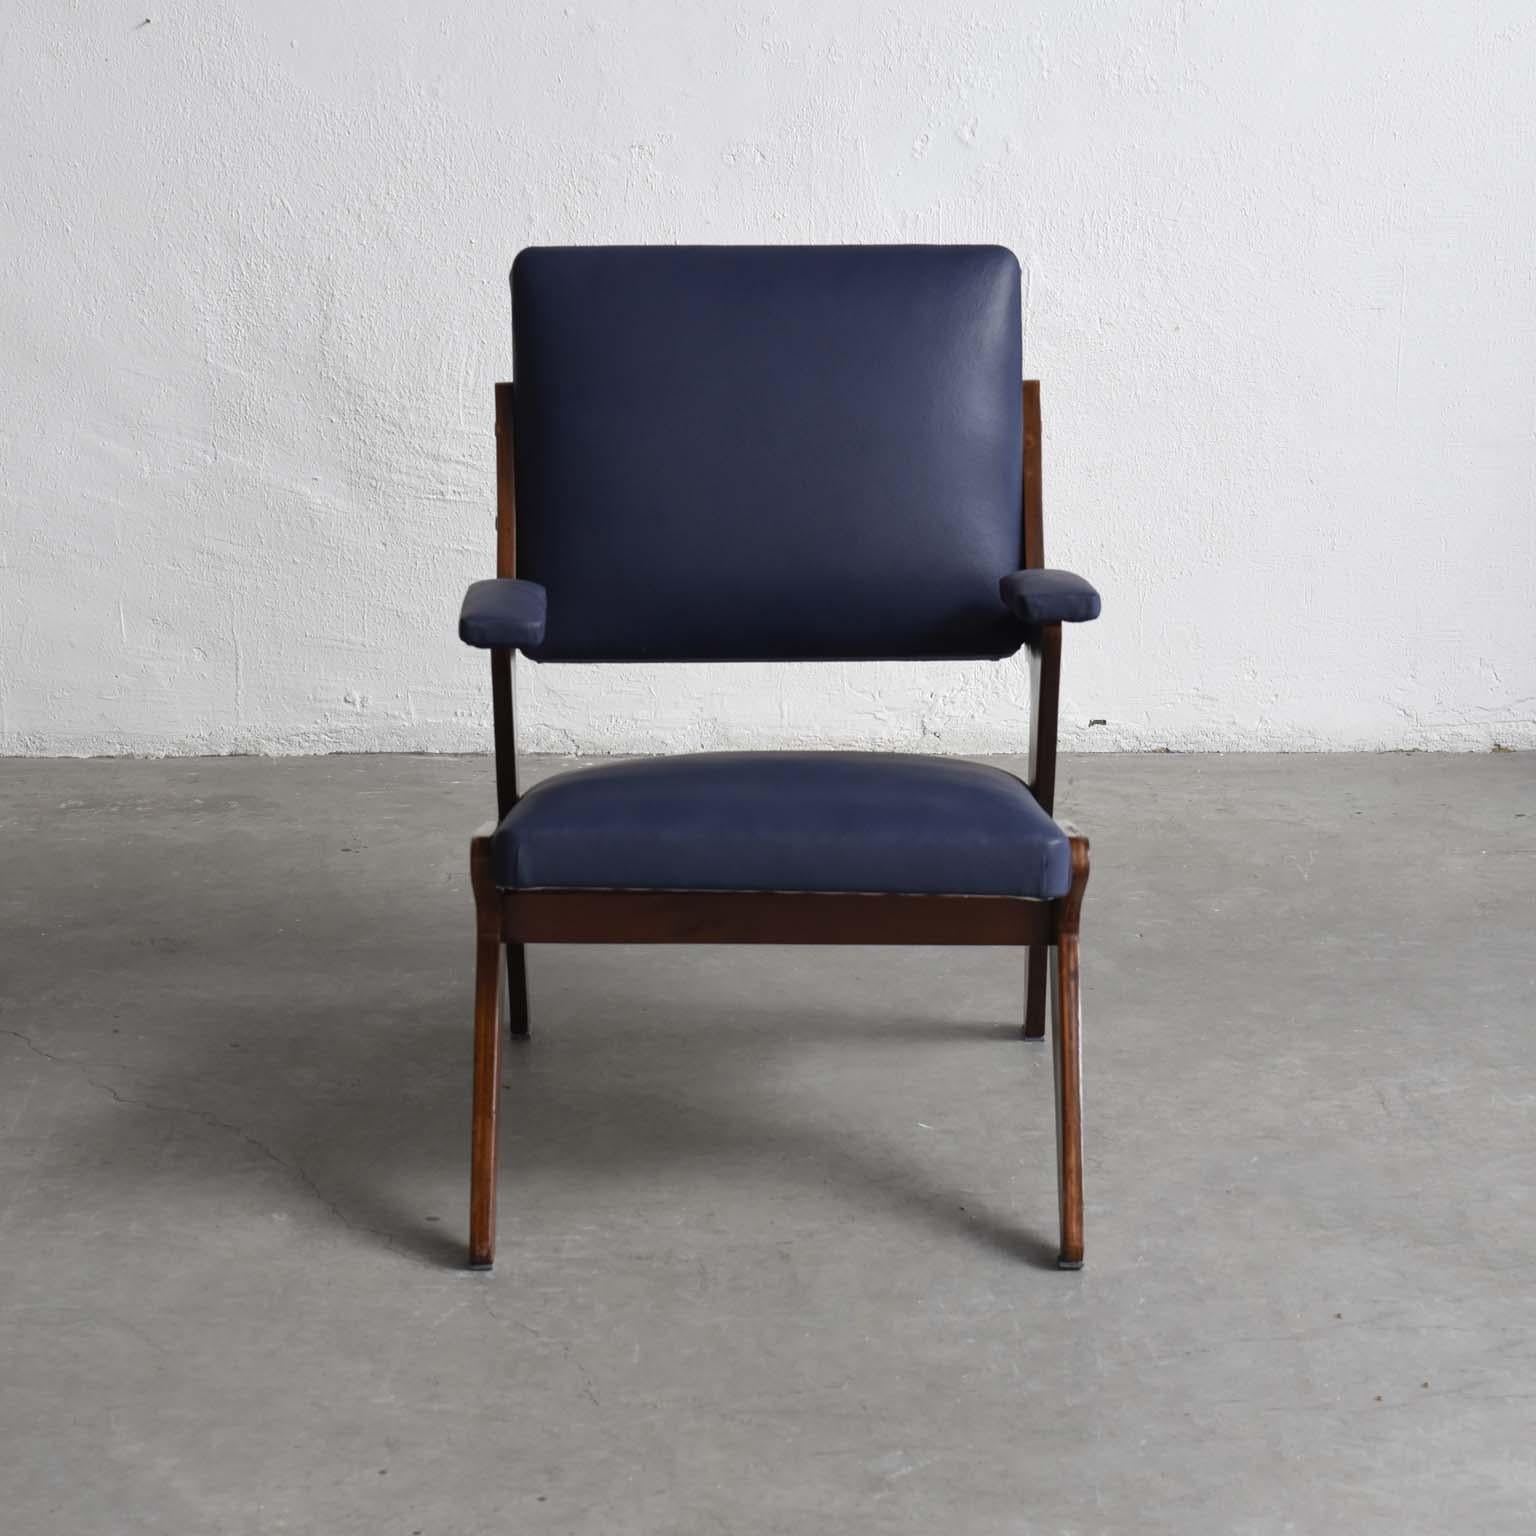 Faux Leather Attributed to Móveis Artísticos Z Midcentury Brazilian Armchair, 1950s For Sale